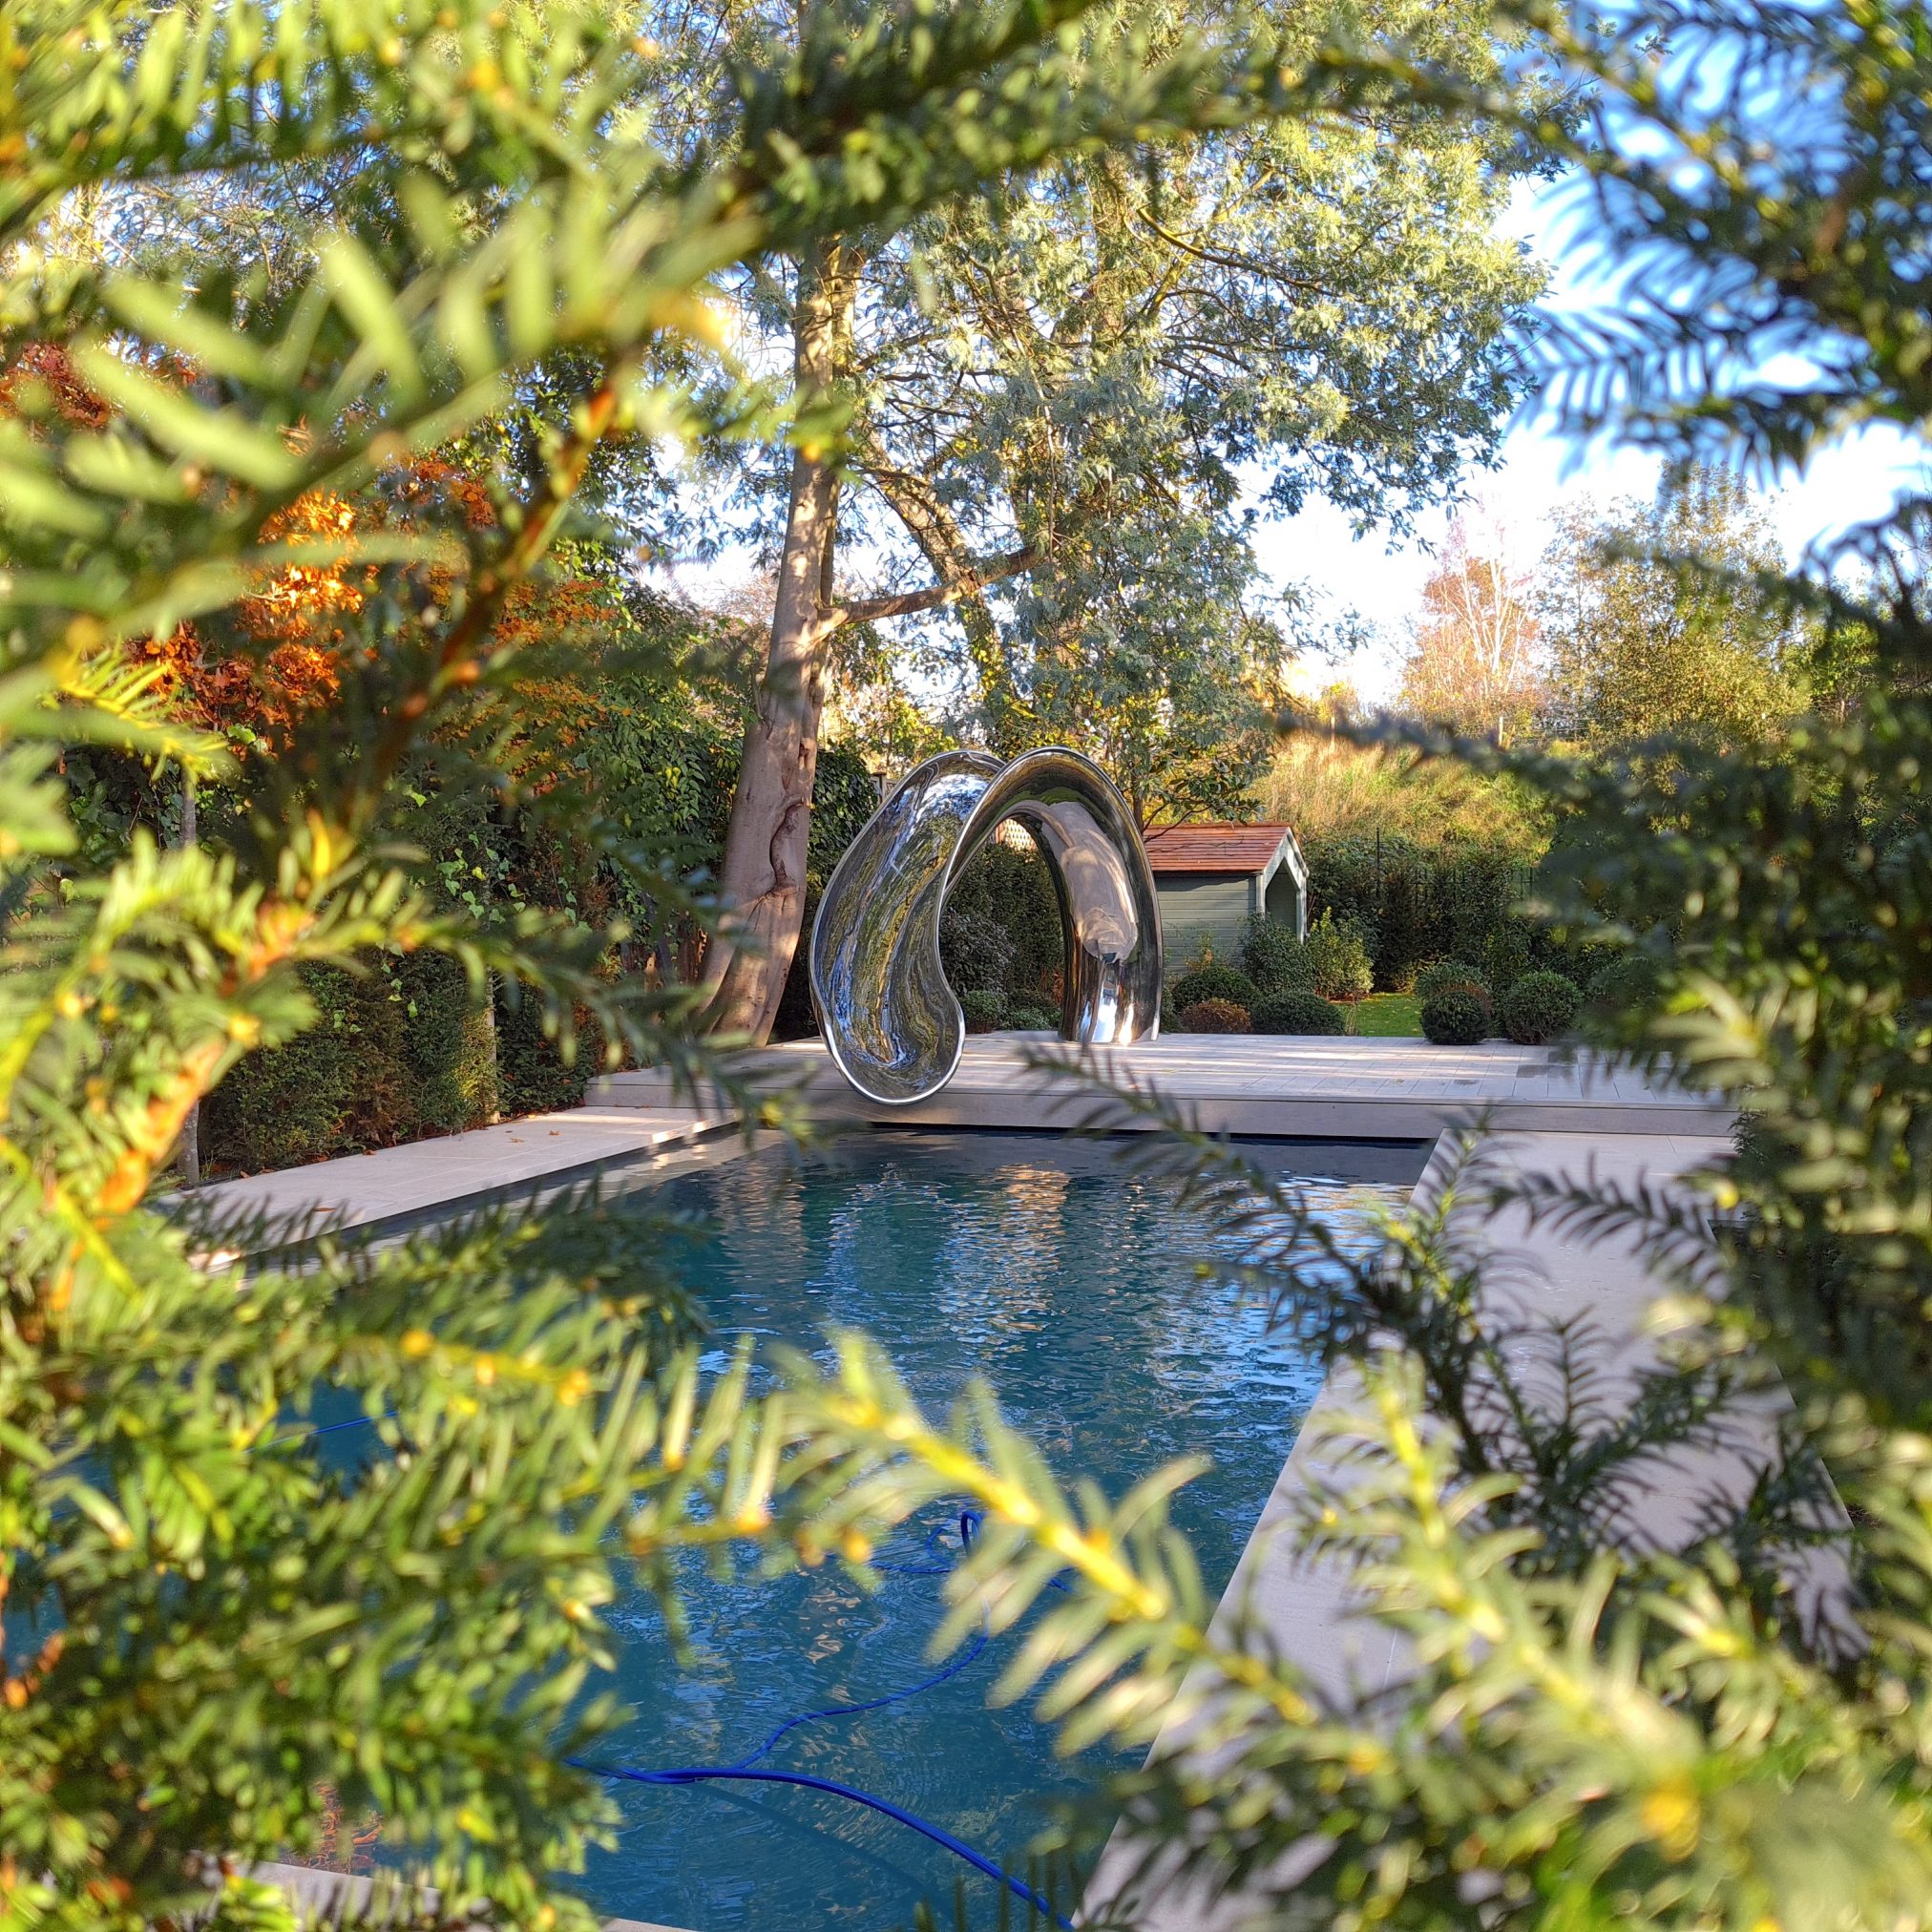 Water slide surrounded by trees